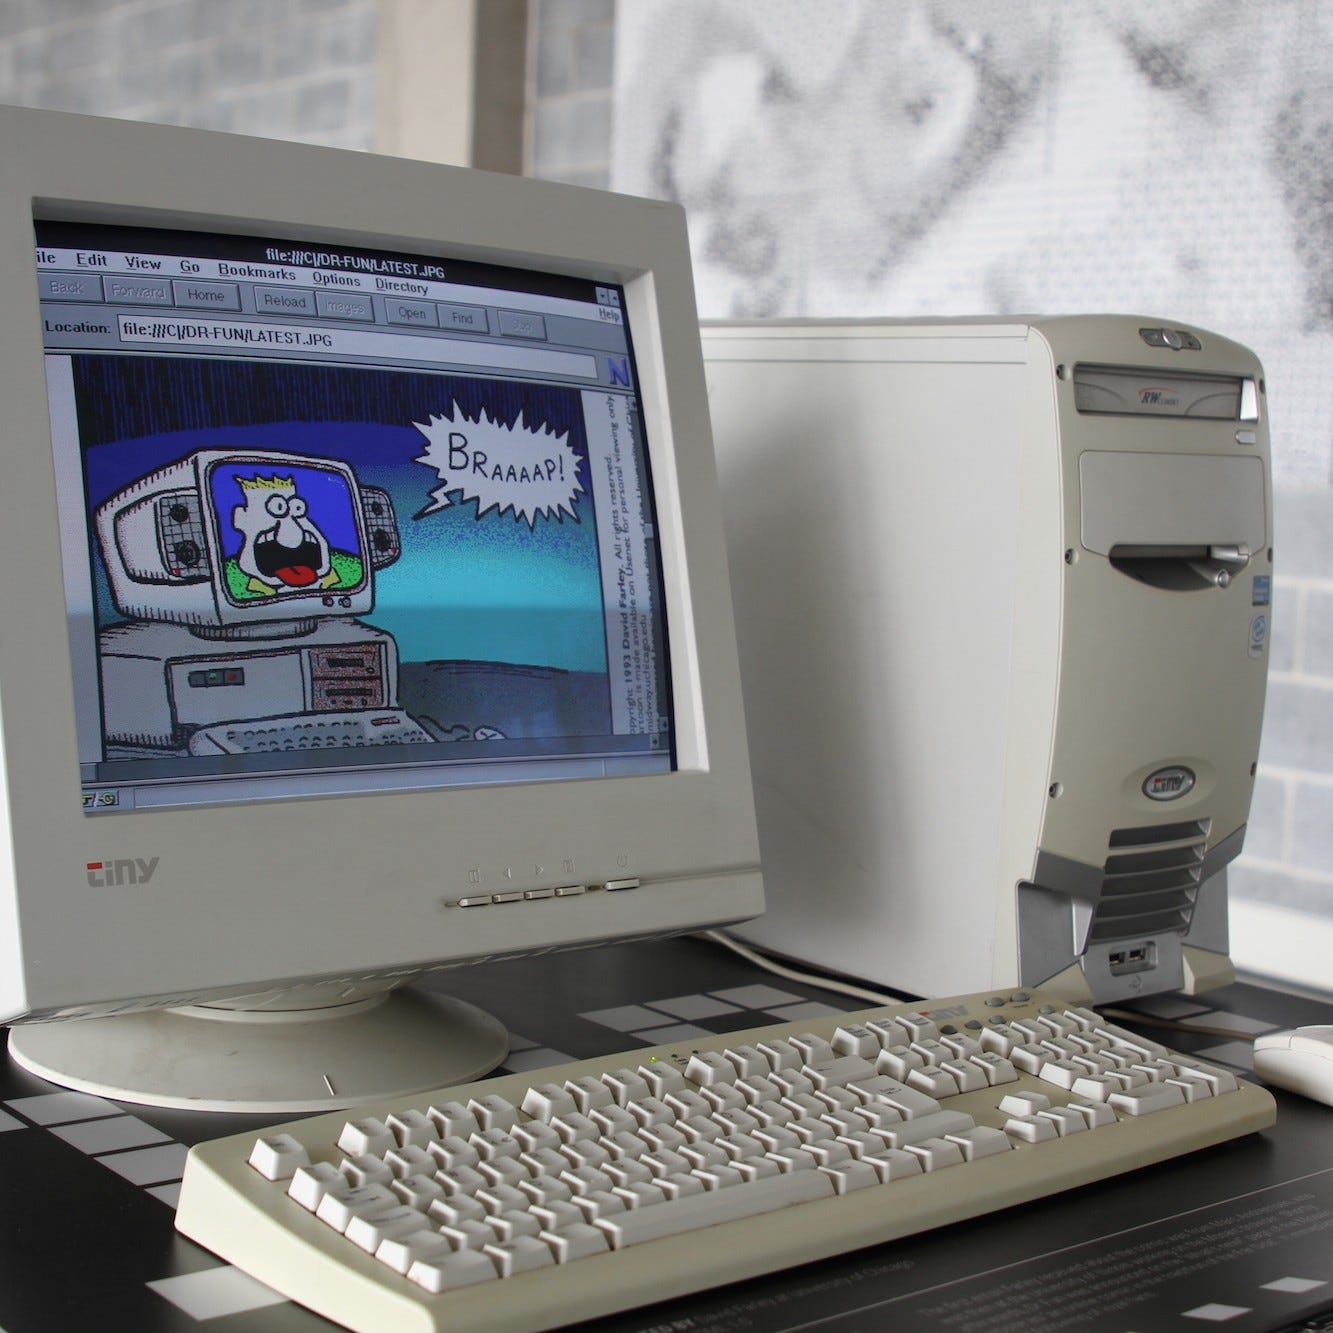 I Surfed the Wholesome Web of the 1990s at This Historically Accurate  Internet Cafe